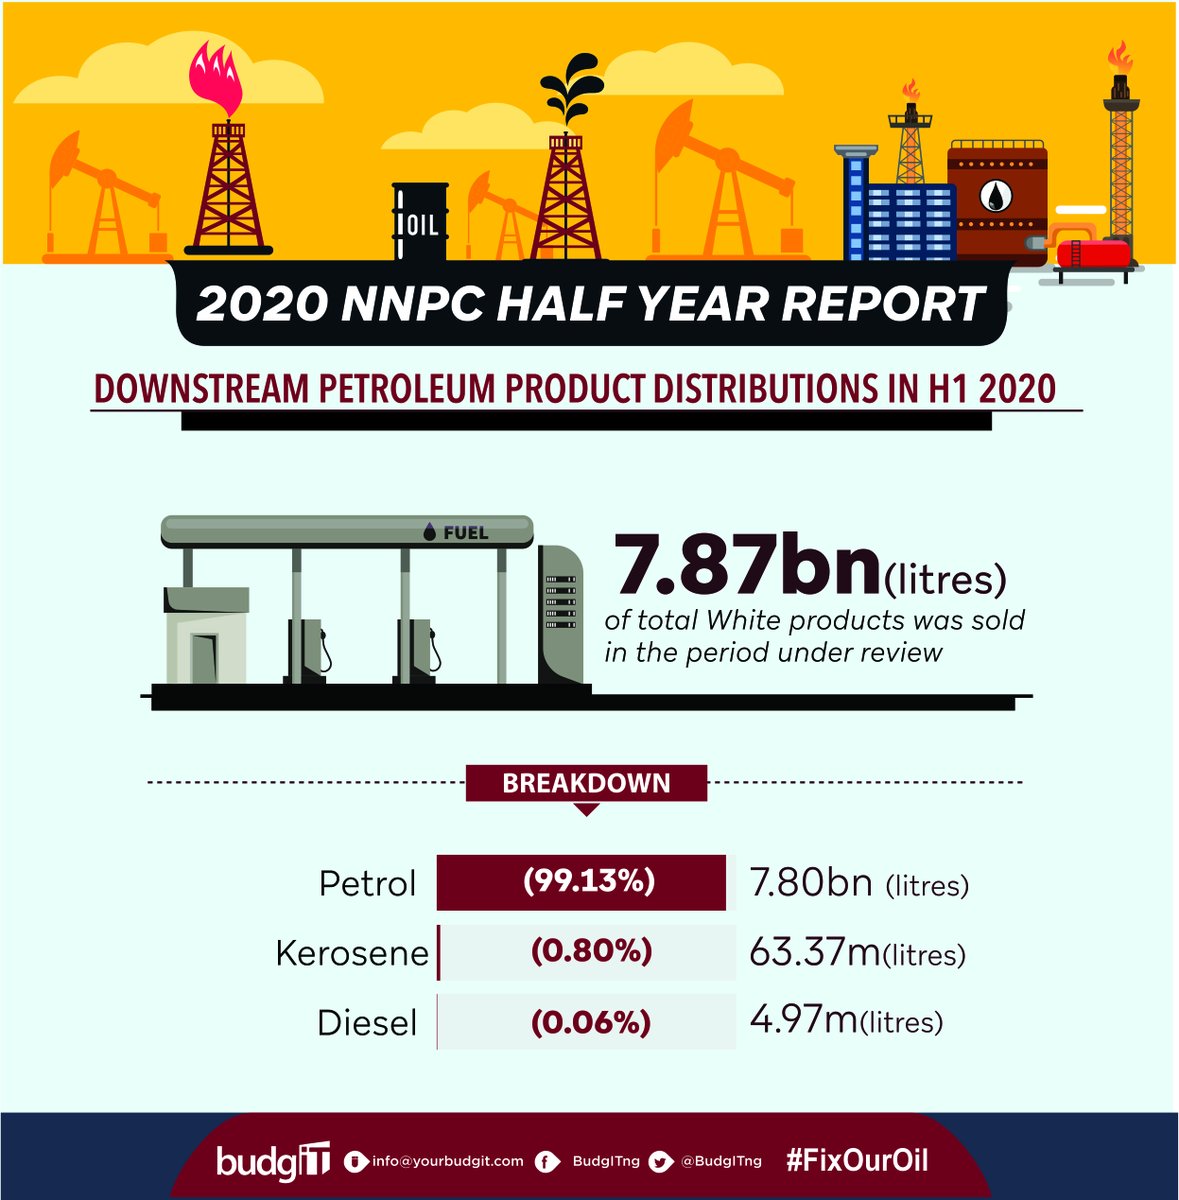 A total of 8.79 billion litres of petroleum products was supplied by NNPC through Direct Sales Direct Purchase (DSDP) in H1 2020 while 7.87 billion litres of white products were sold. #FixOurOil